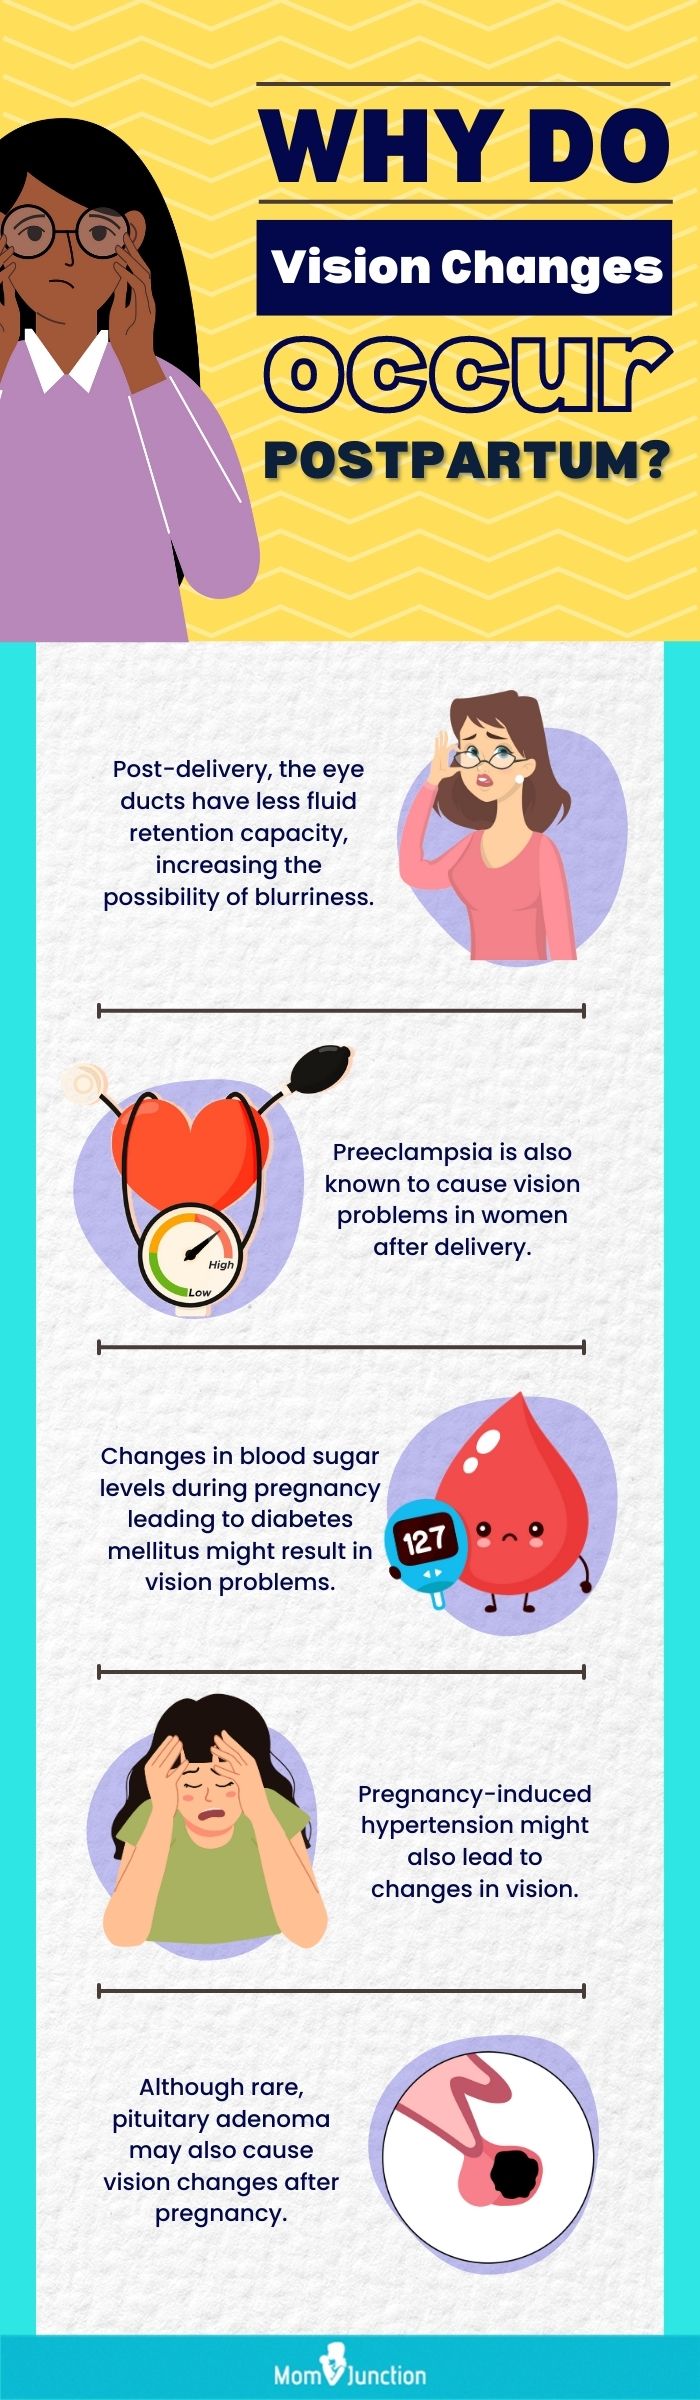 why do vision changes occur postpartum (infographic)